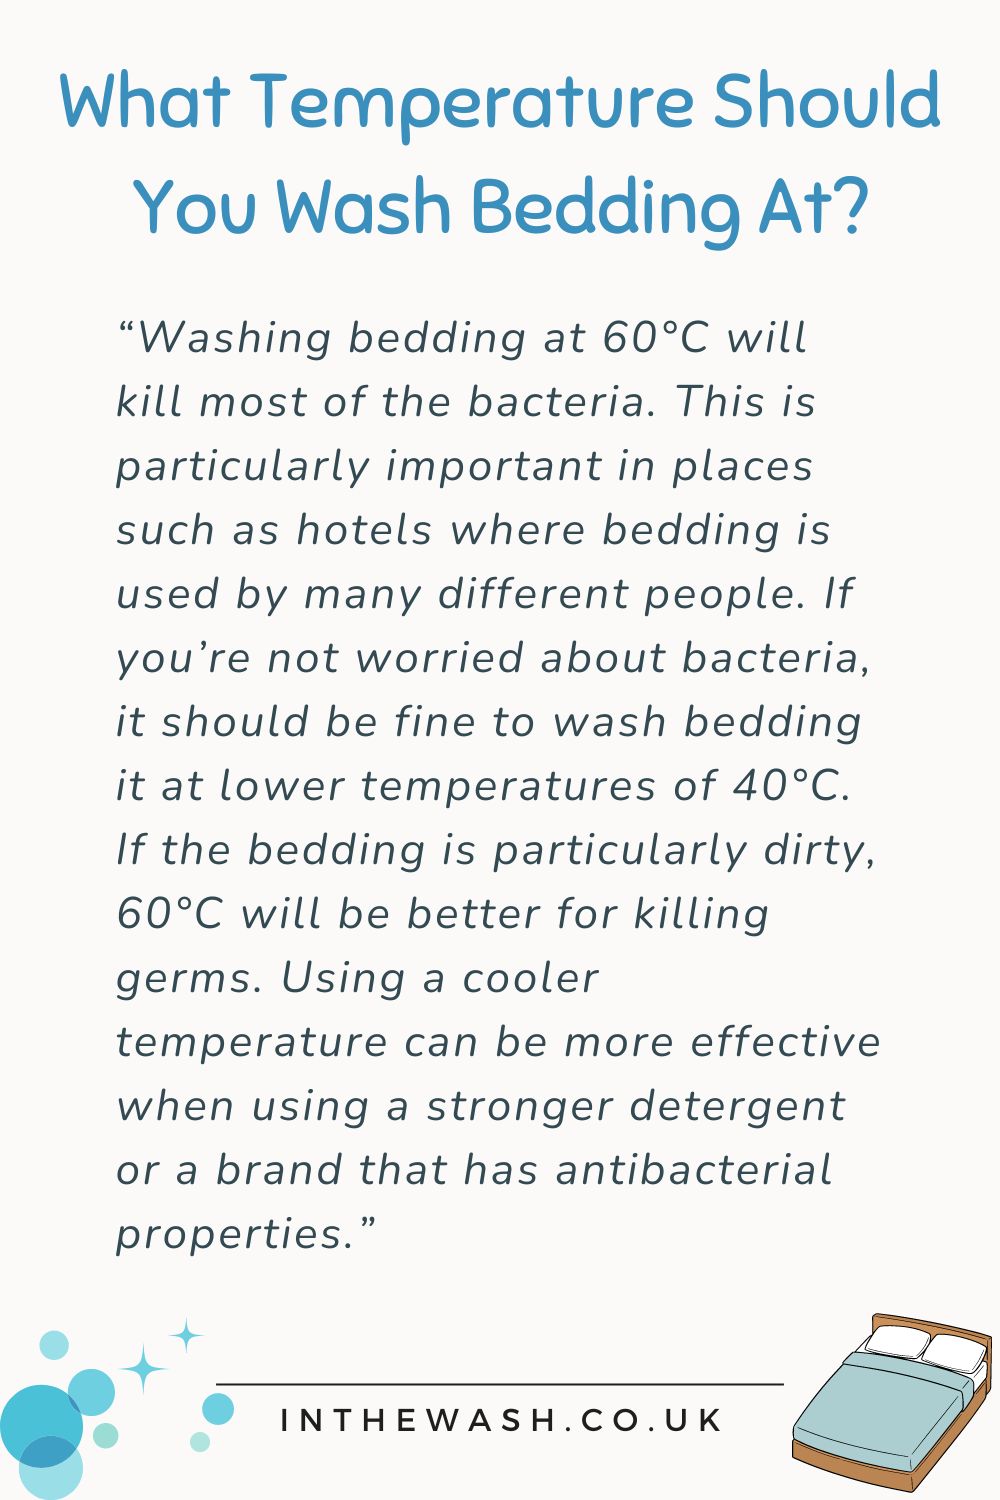 What Temperature Should You Wash Bedding At?